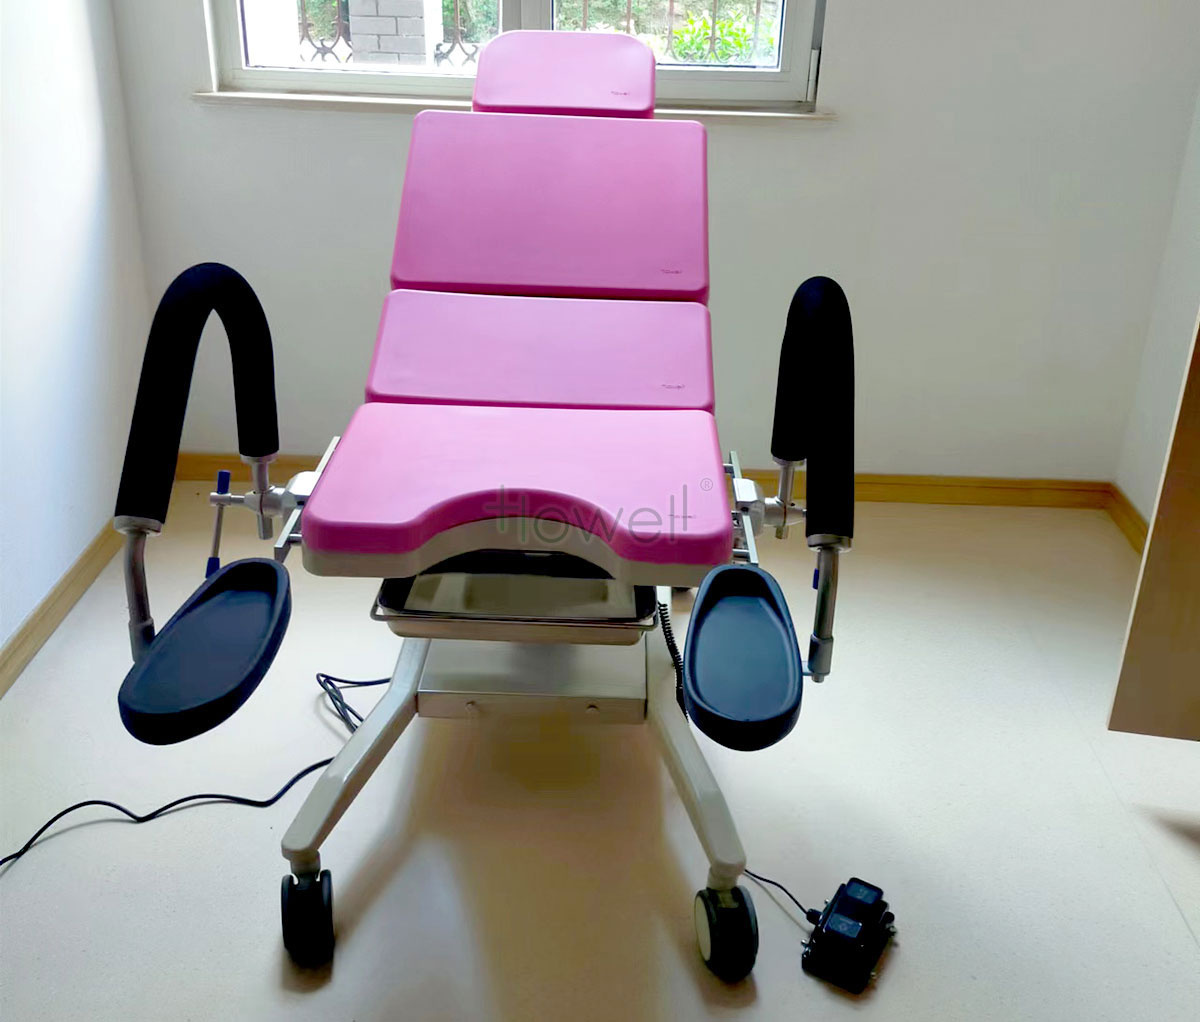 obstetric delivery table